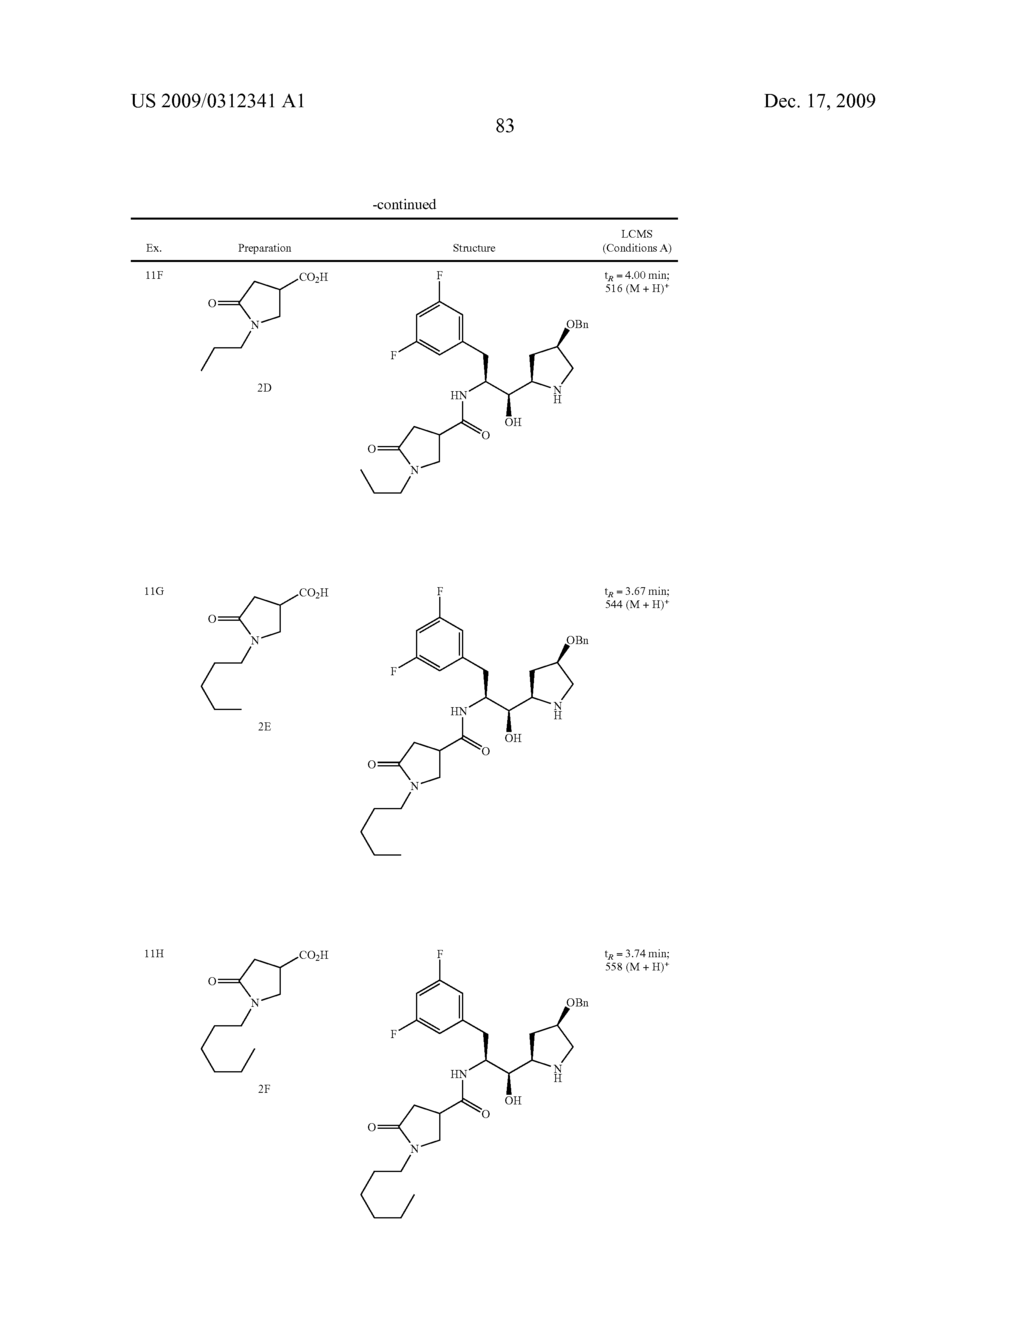 CYCLIC AMINE BACE-1 INHIBITORS HAVING A HETEROCYCLIC SUBSTITUENT - diagram, schematic, and image 84